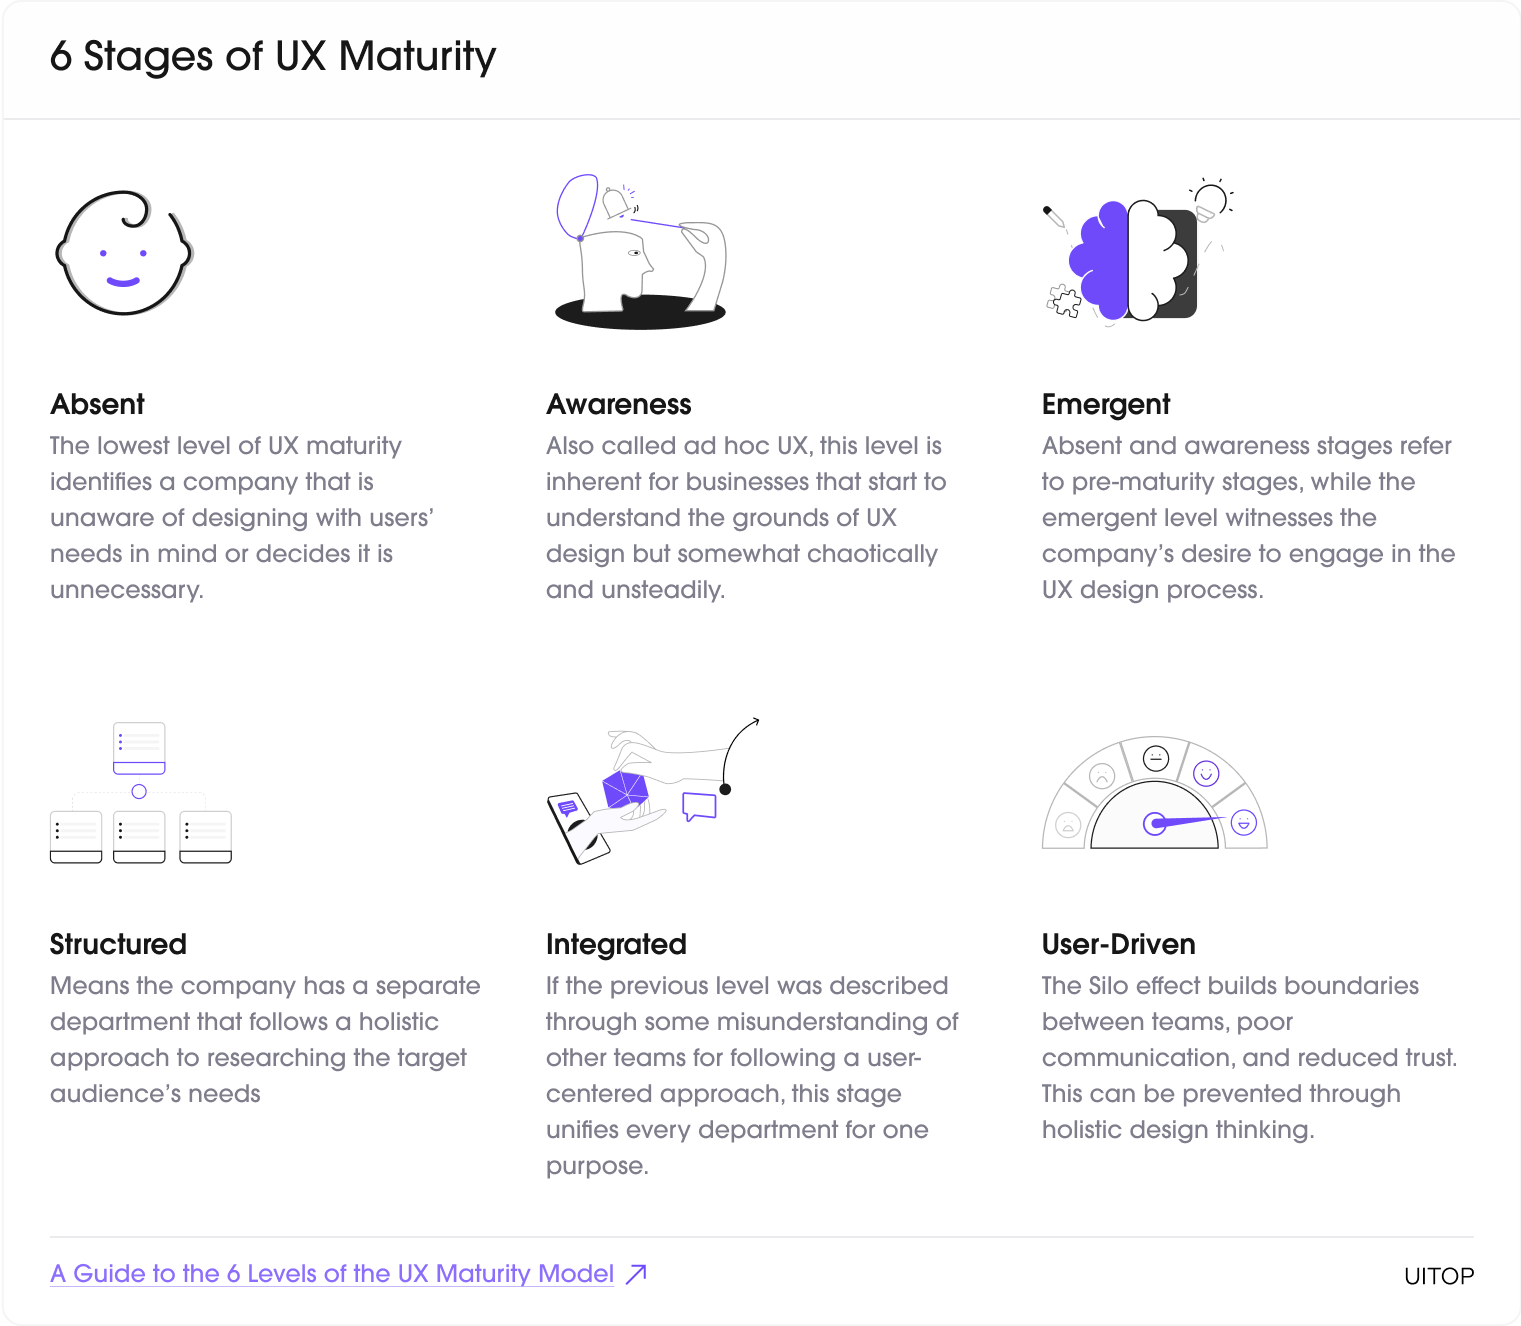 6 Stages of UX Maturity